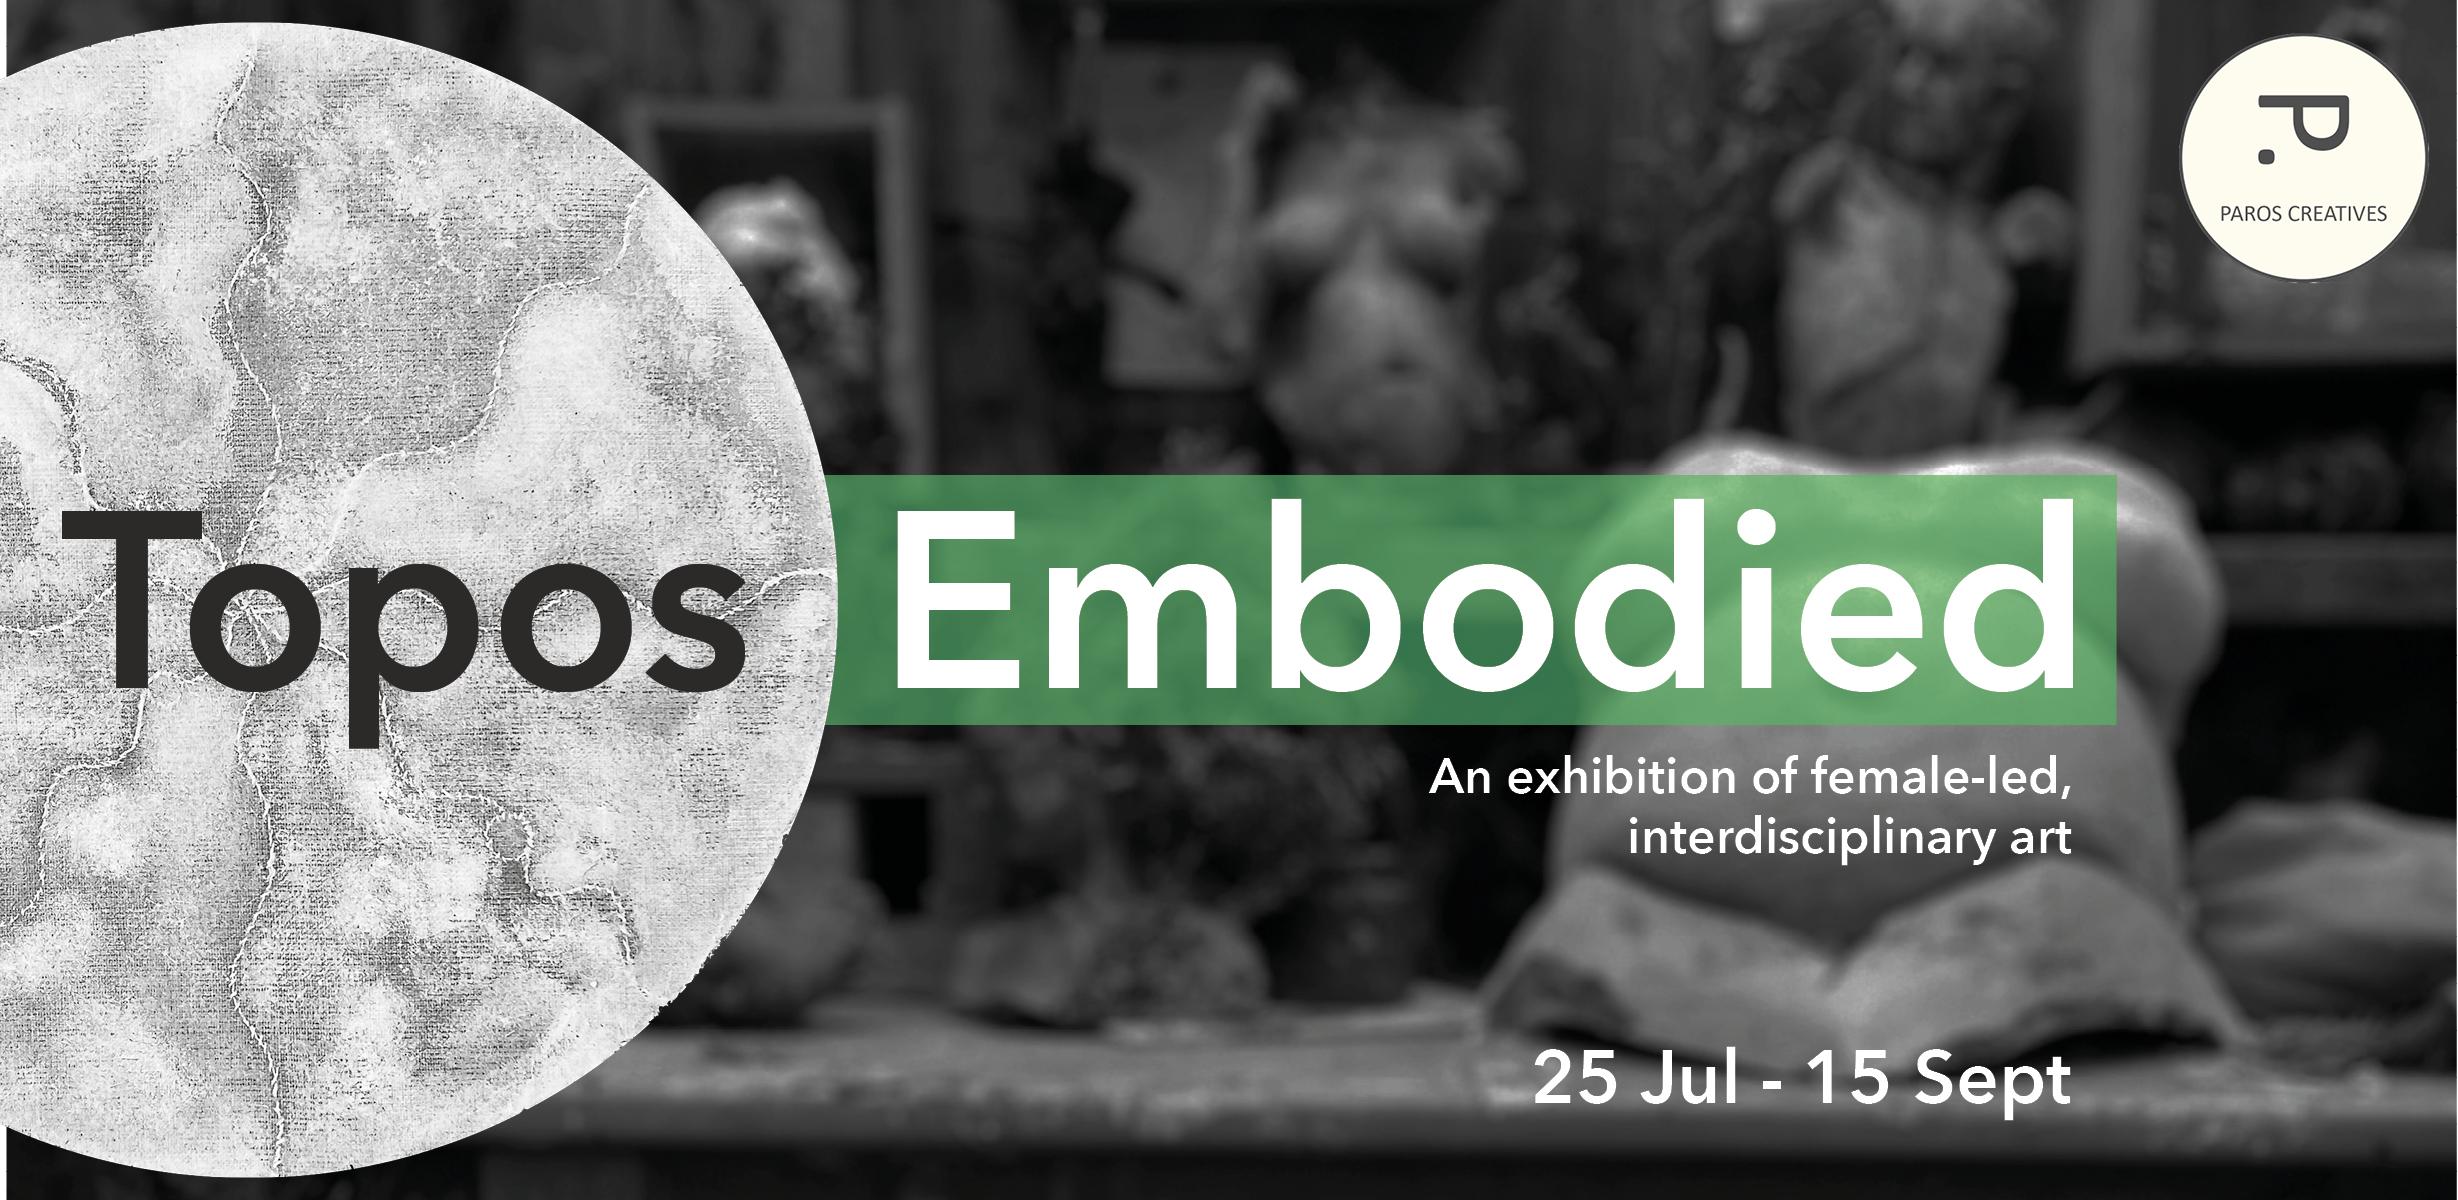 Topos Embodied. An exhibition of female-led, interdisciplinary art. 25 Jul - 15 Sept